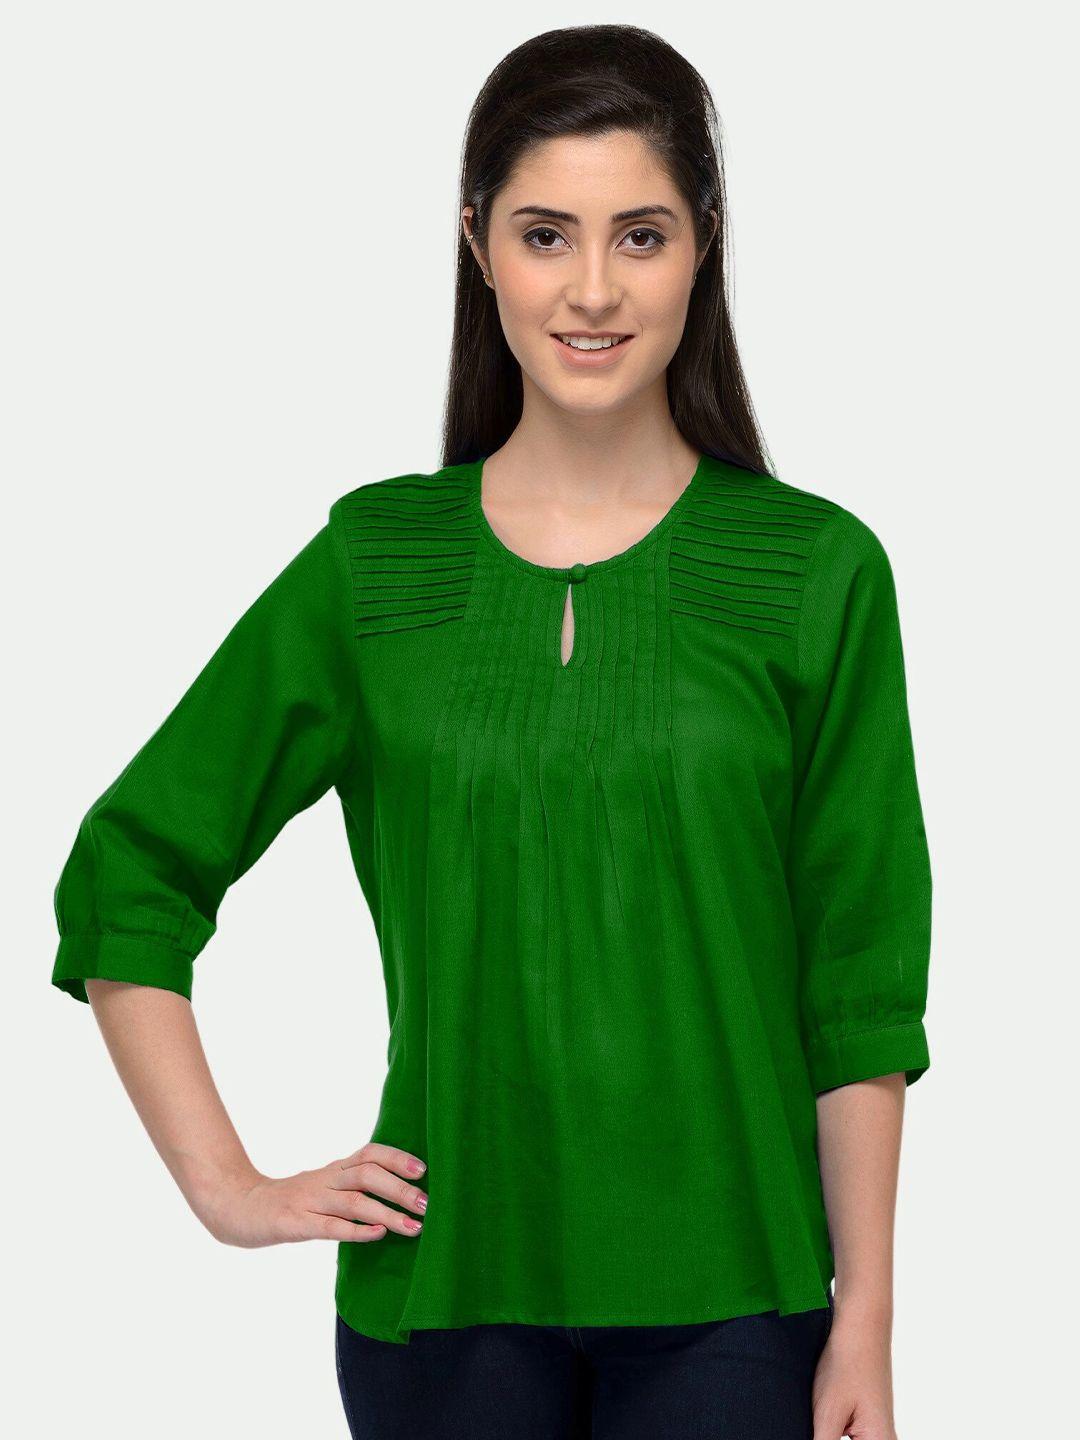 patrorna women green solid pleated keyhole neck top